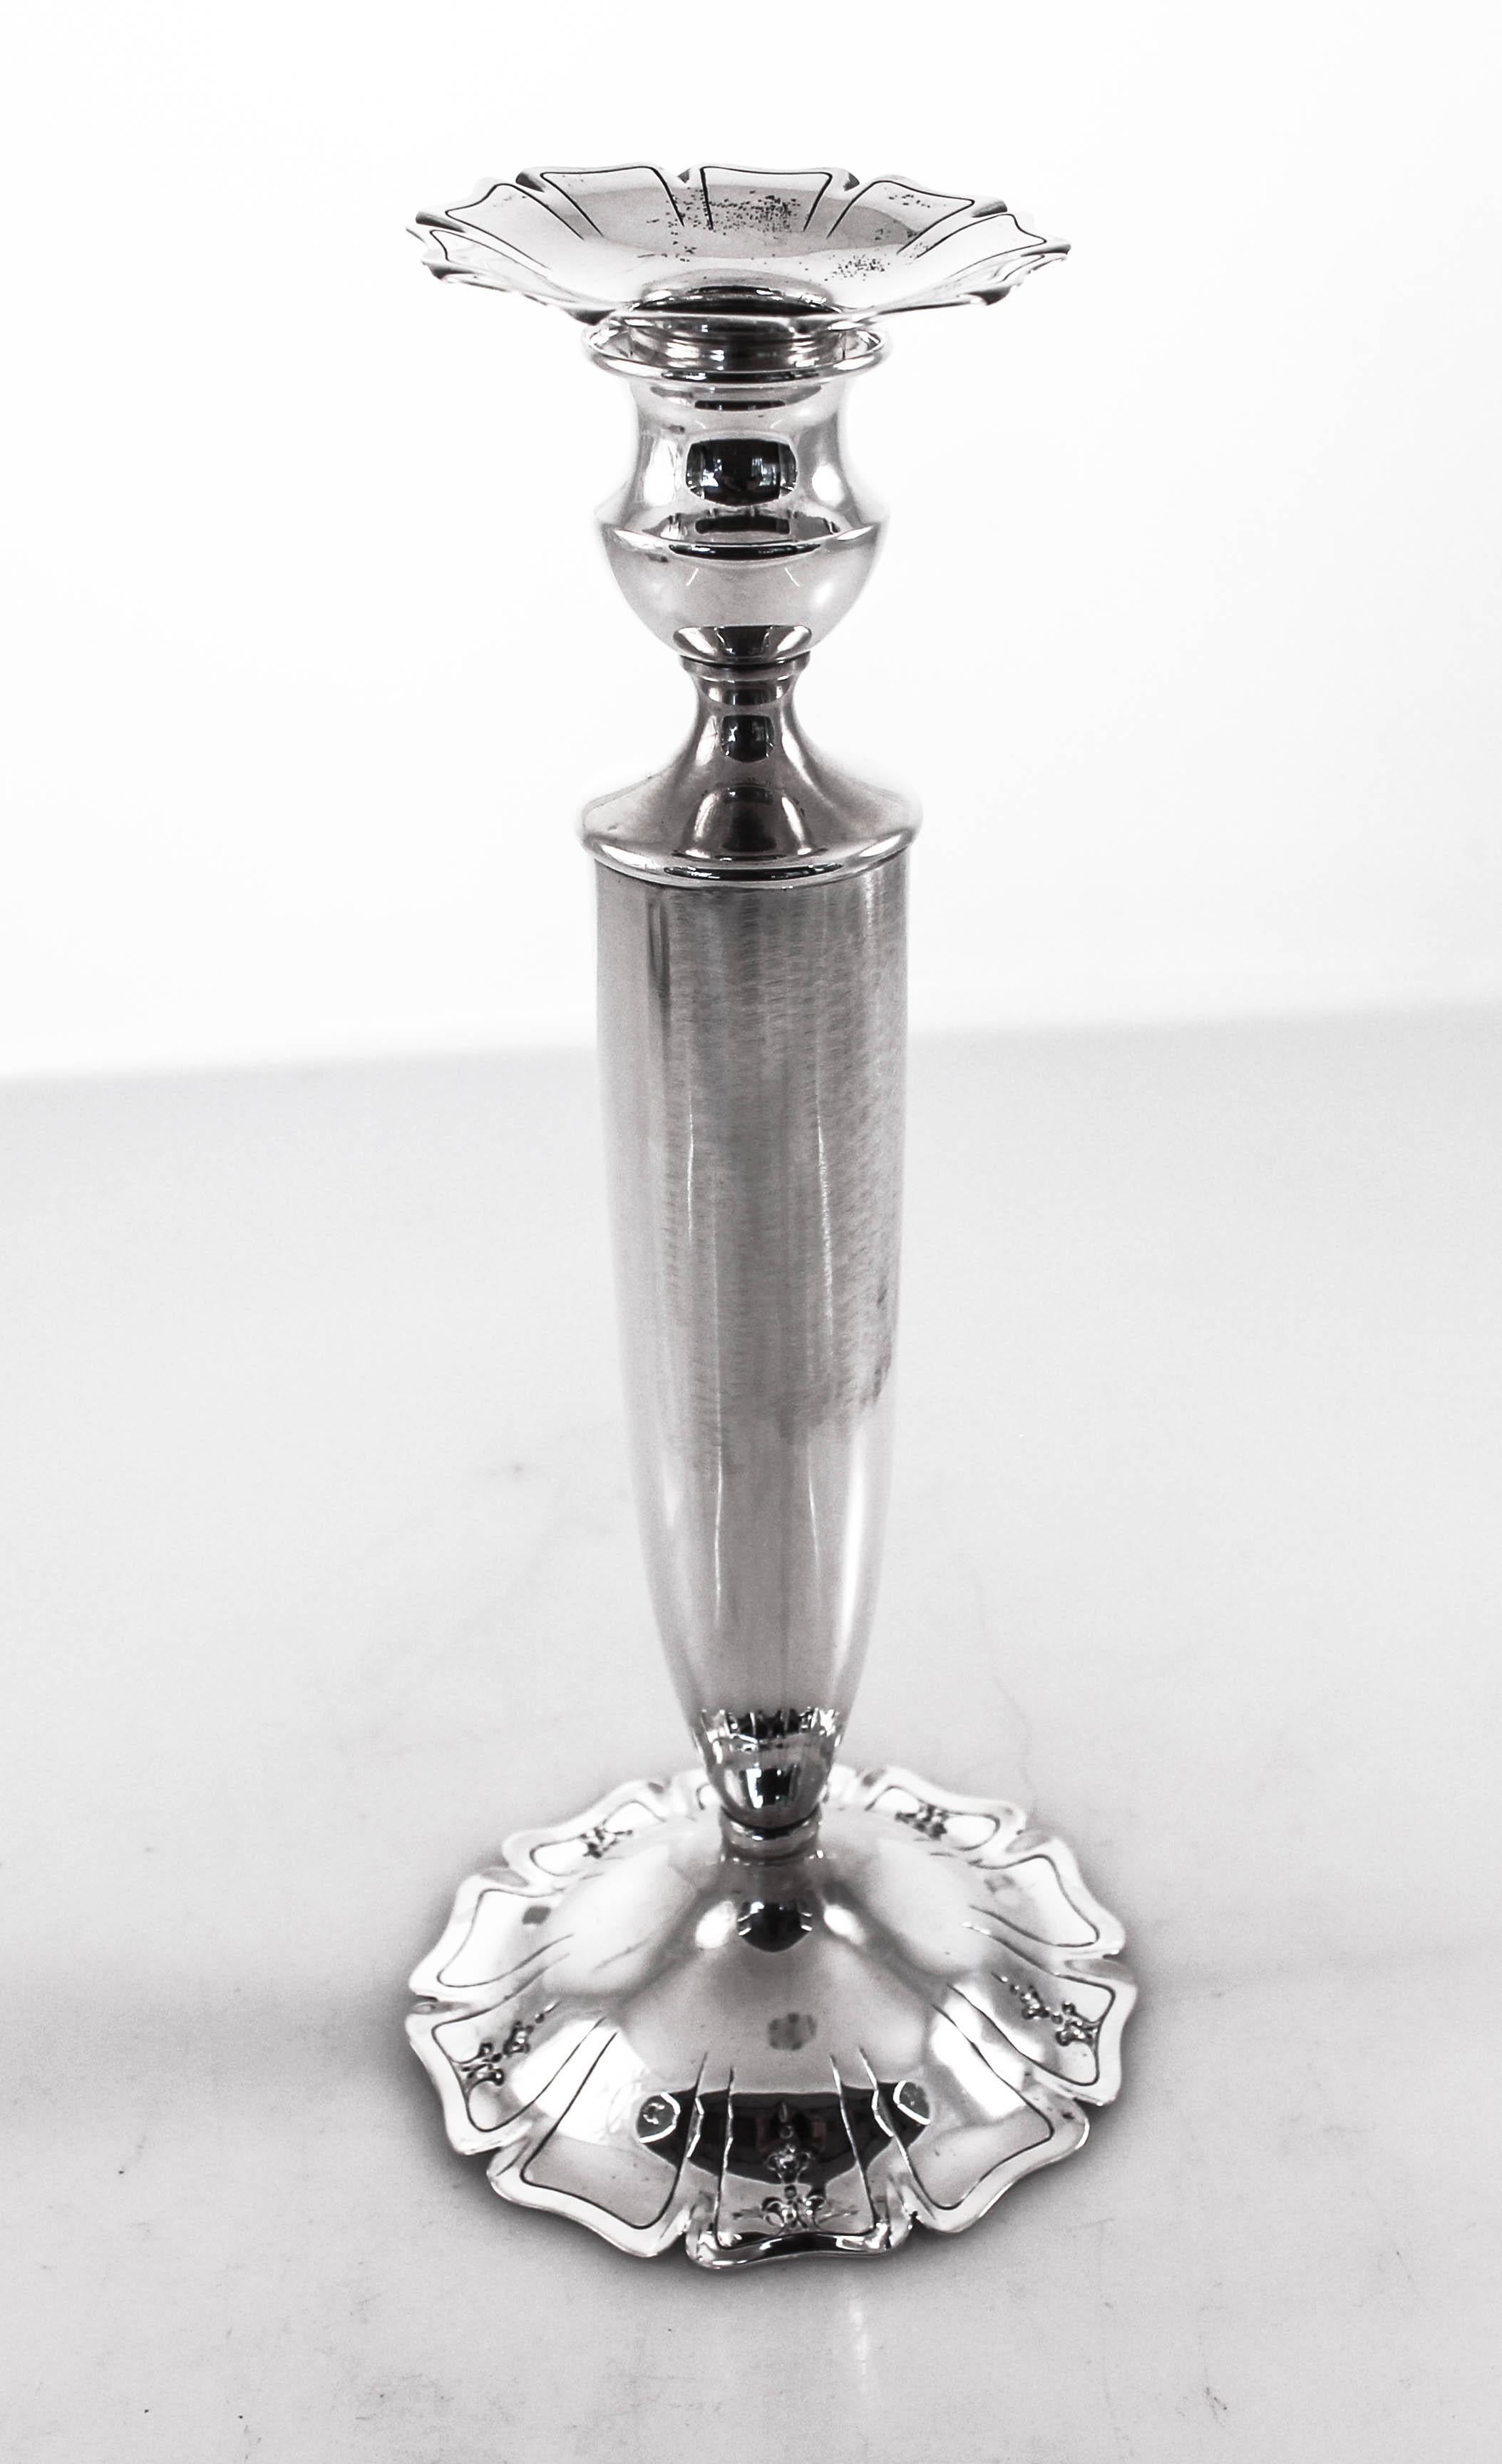 We are proud to offer these sterling silver candlesticks from the 1930s. They have a clean look with just the slightest touch of decoration, along the rim of the base and bobeche it is scalloped and etched. They are not weighted and have been